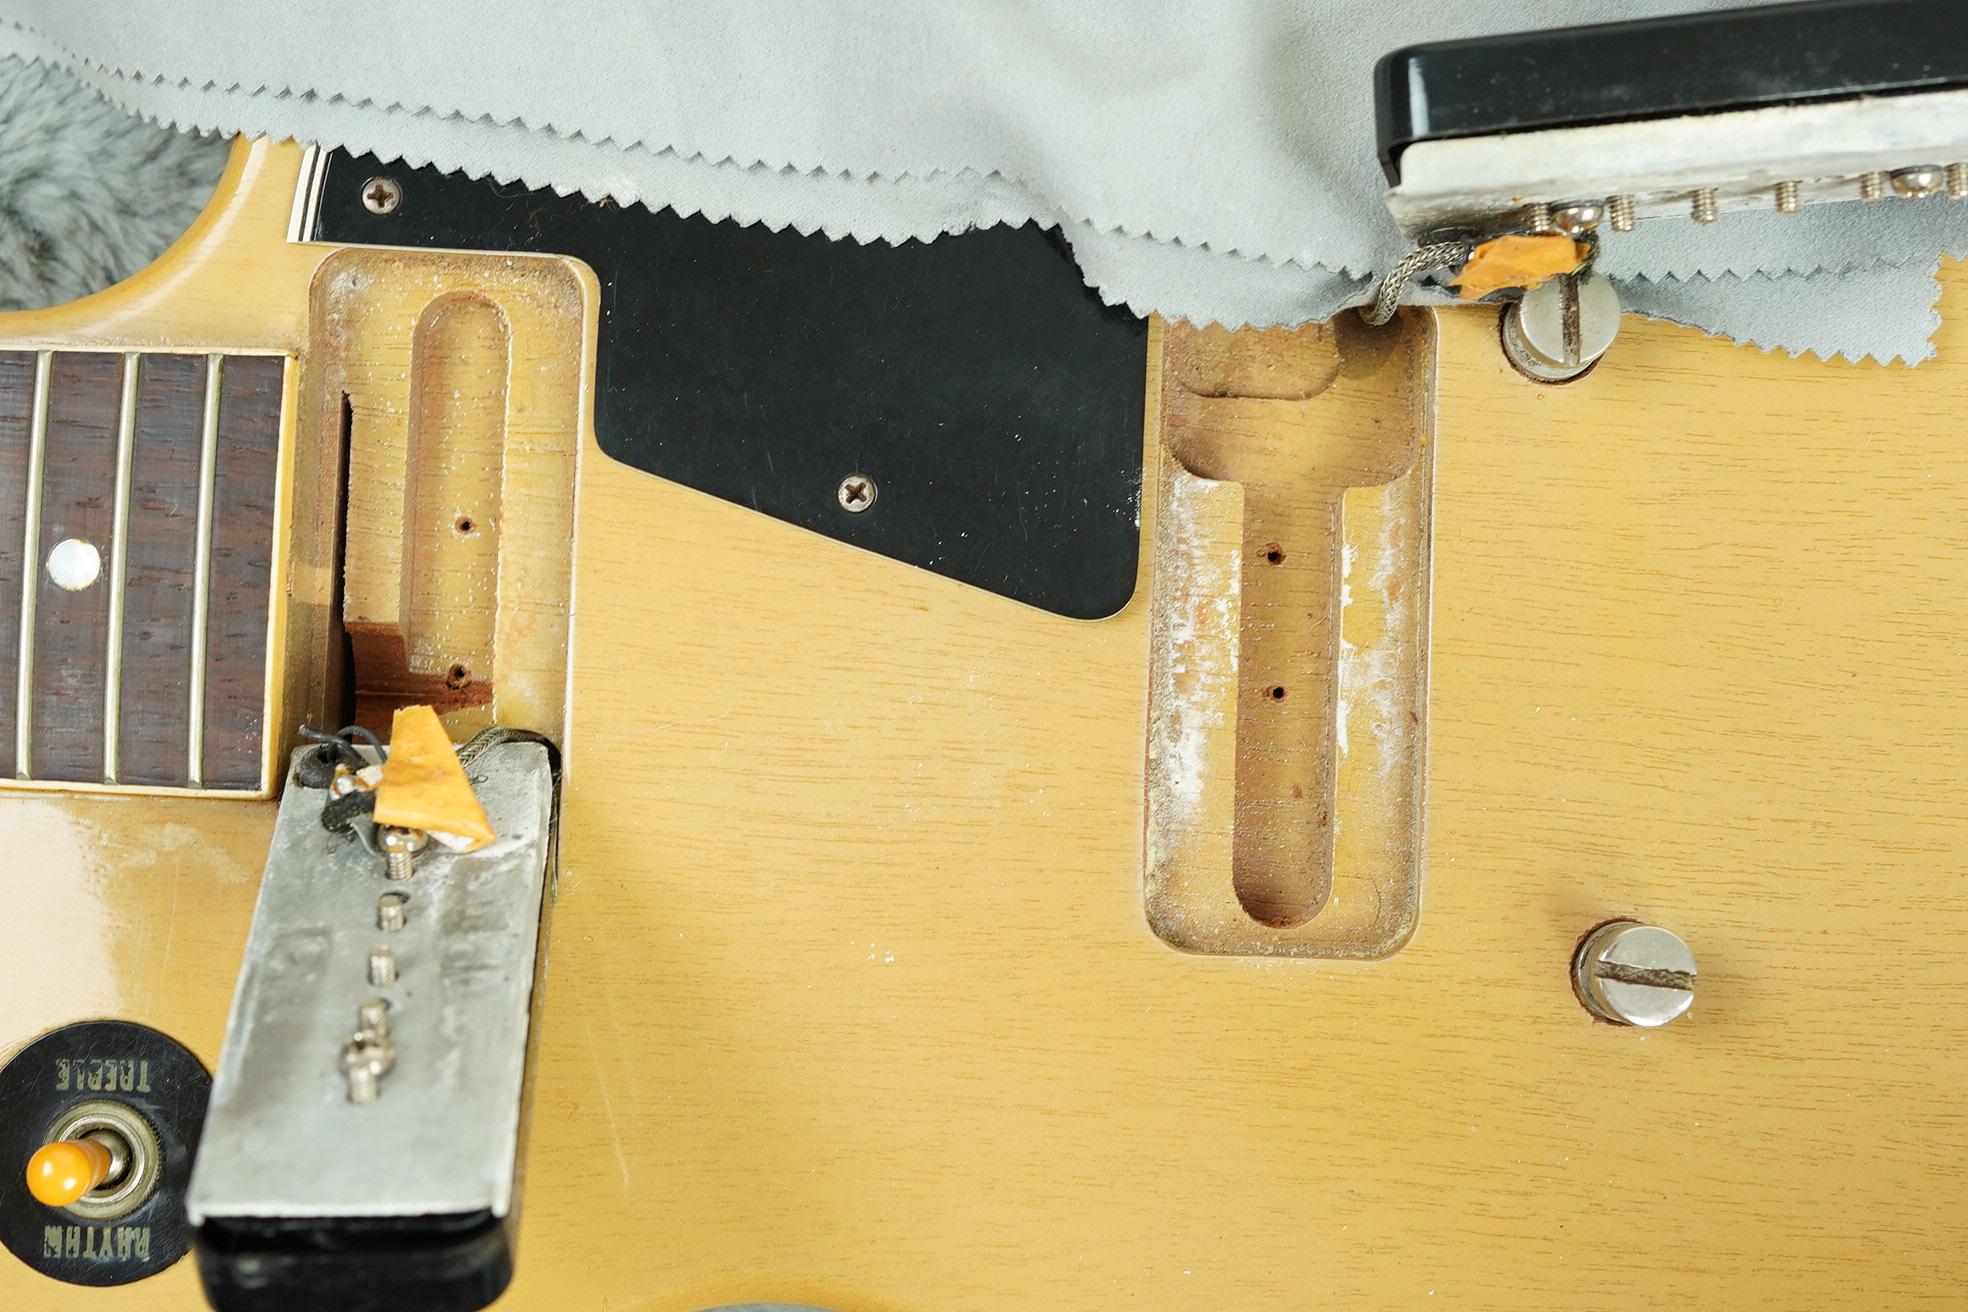 1958 Gibson Les Paul Special